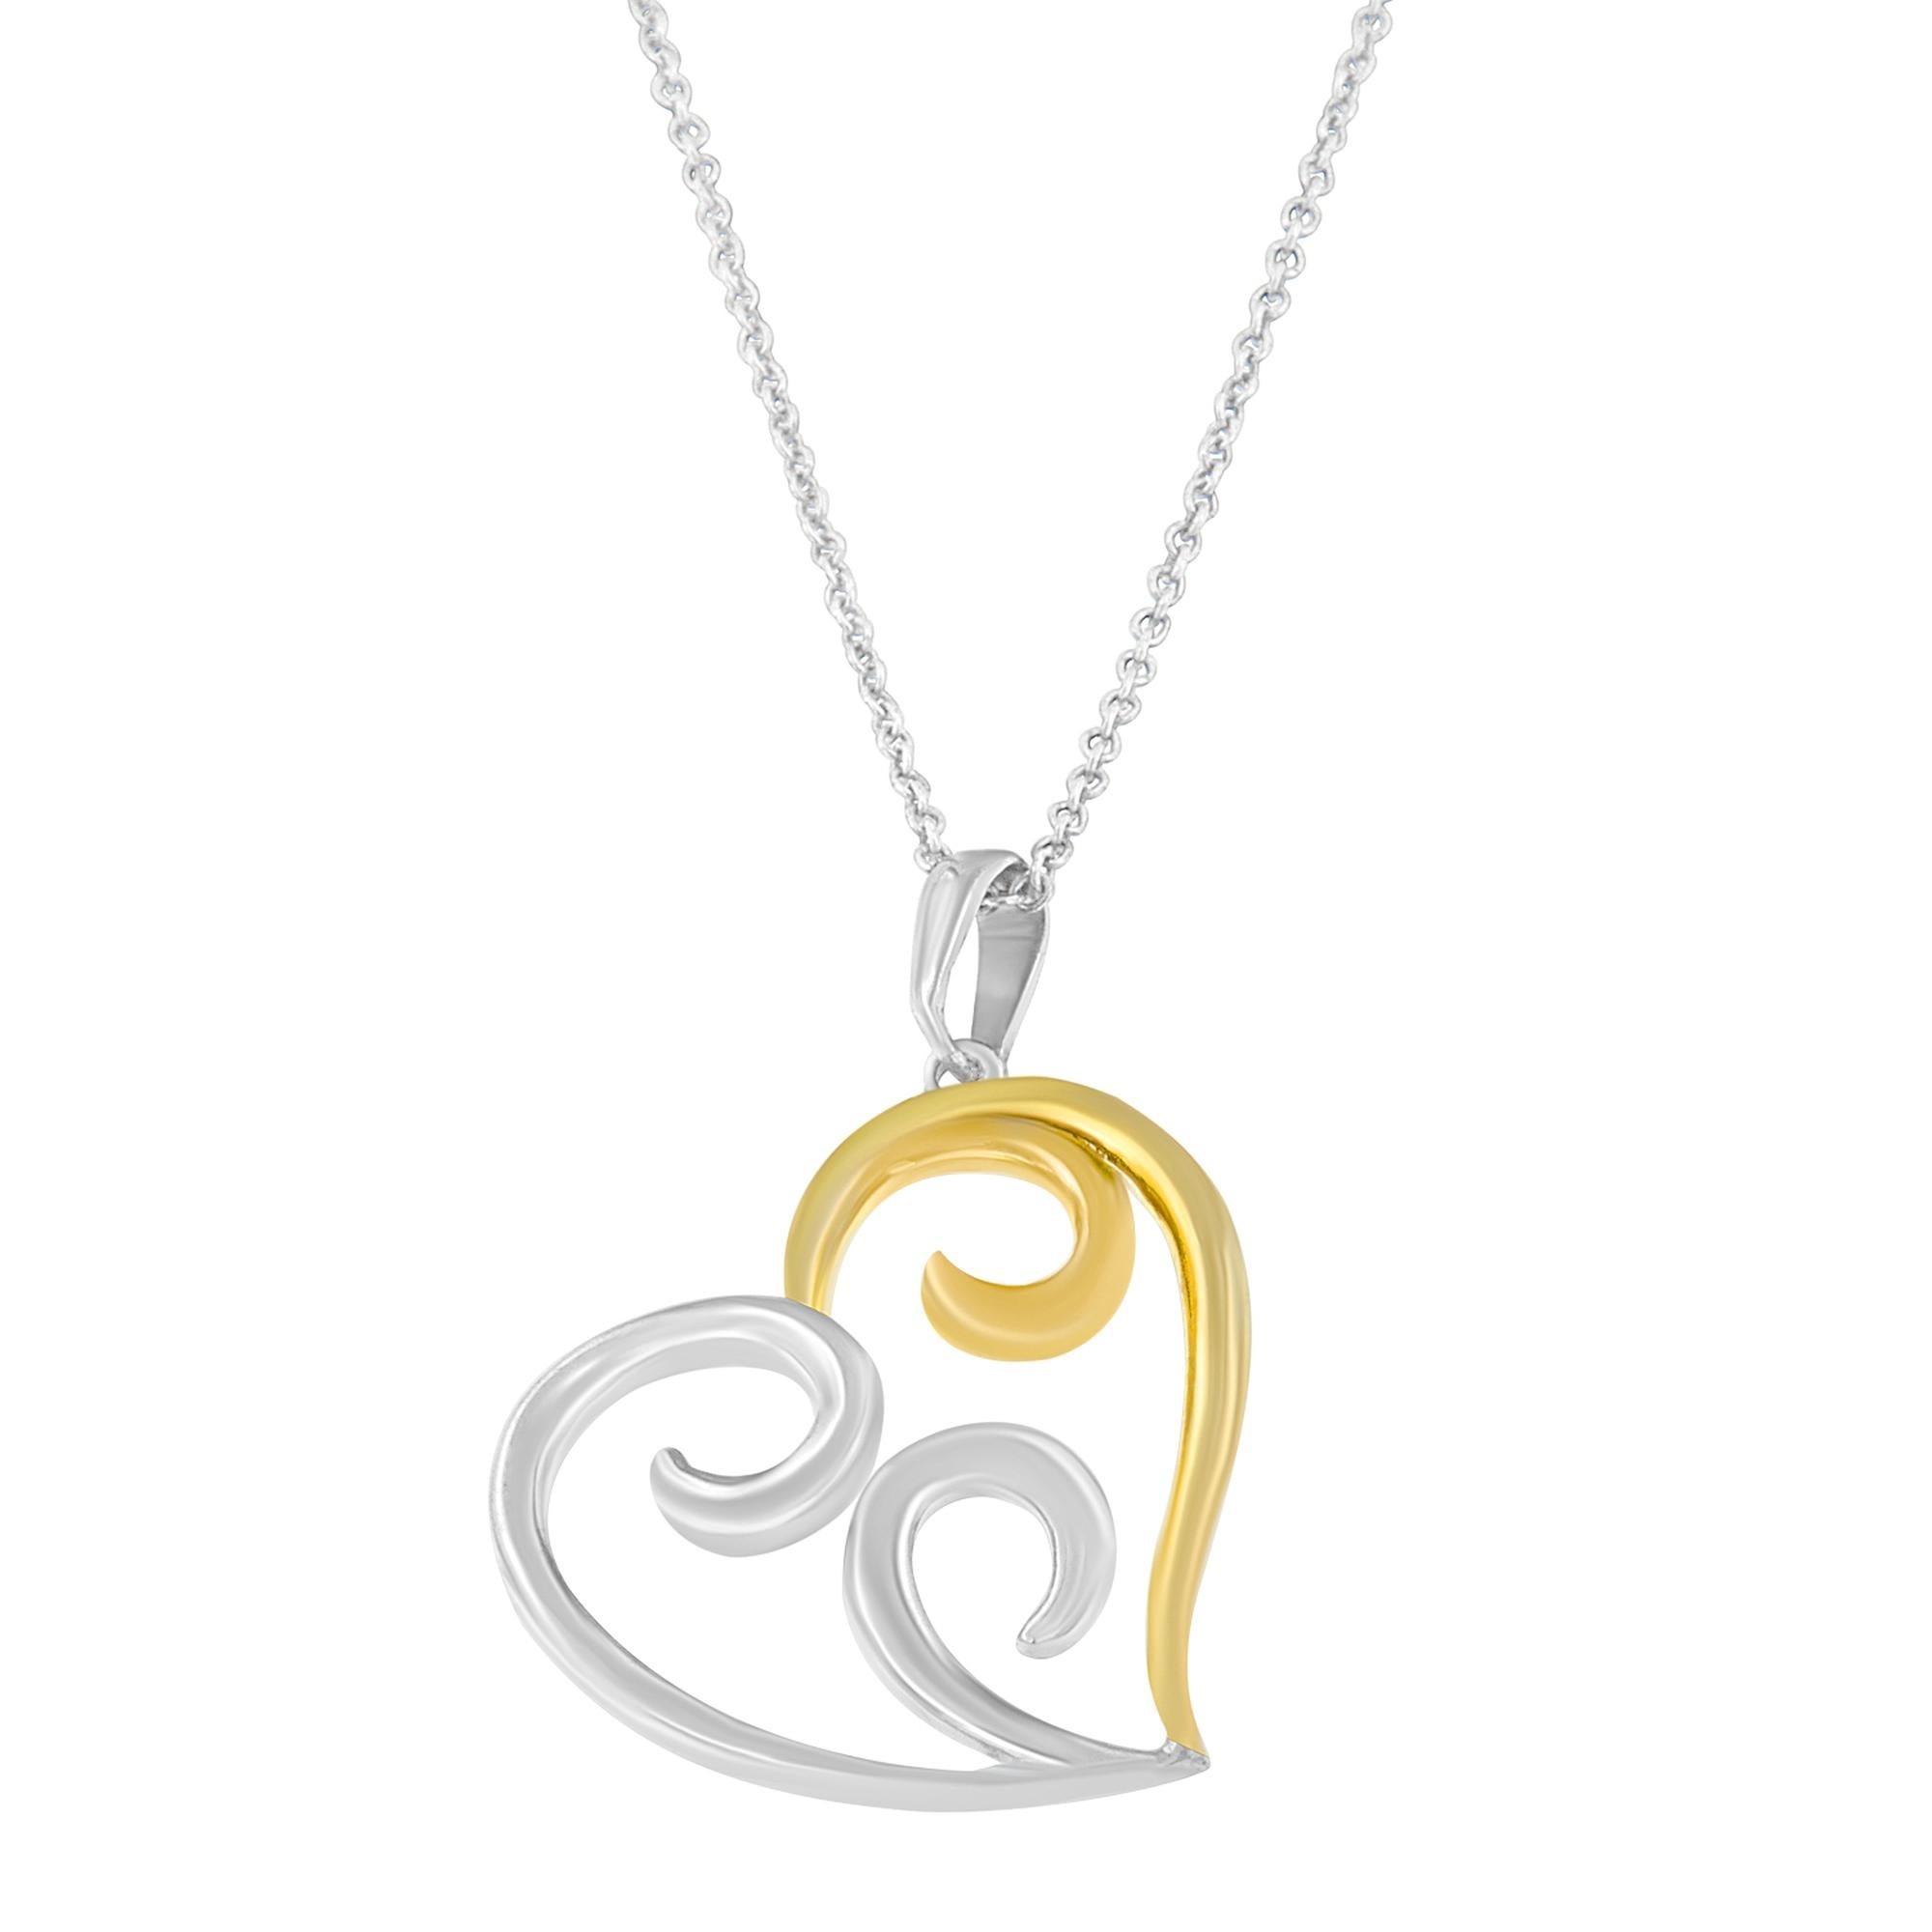 10K Yellow Gold Over Silver Open Heart with Swirls Box Chain Pendant Necklace In New Condition For Sale In New York, NY